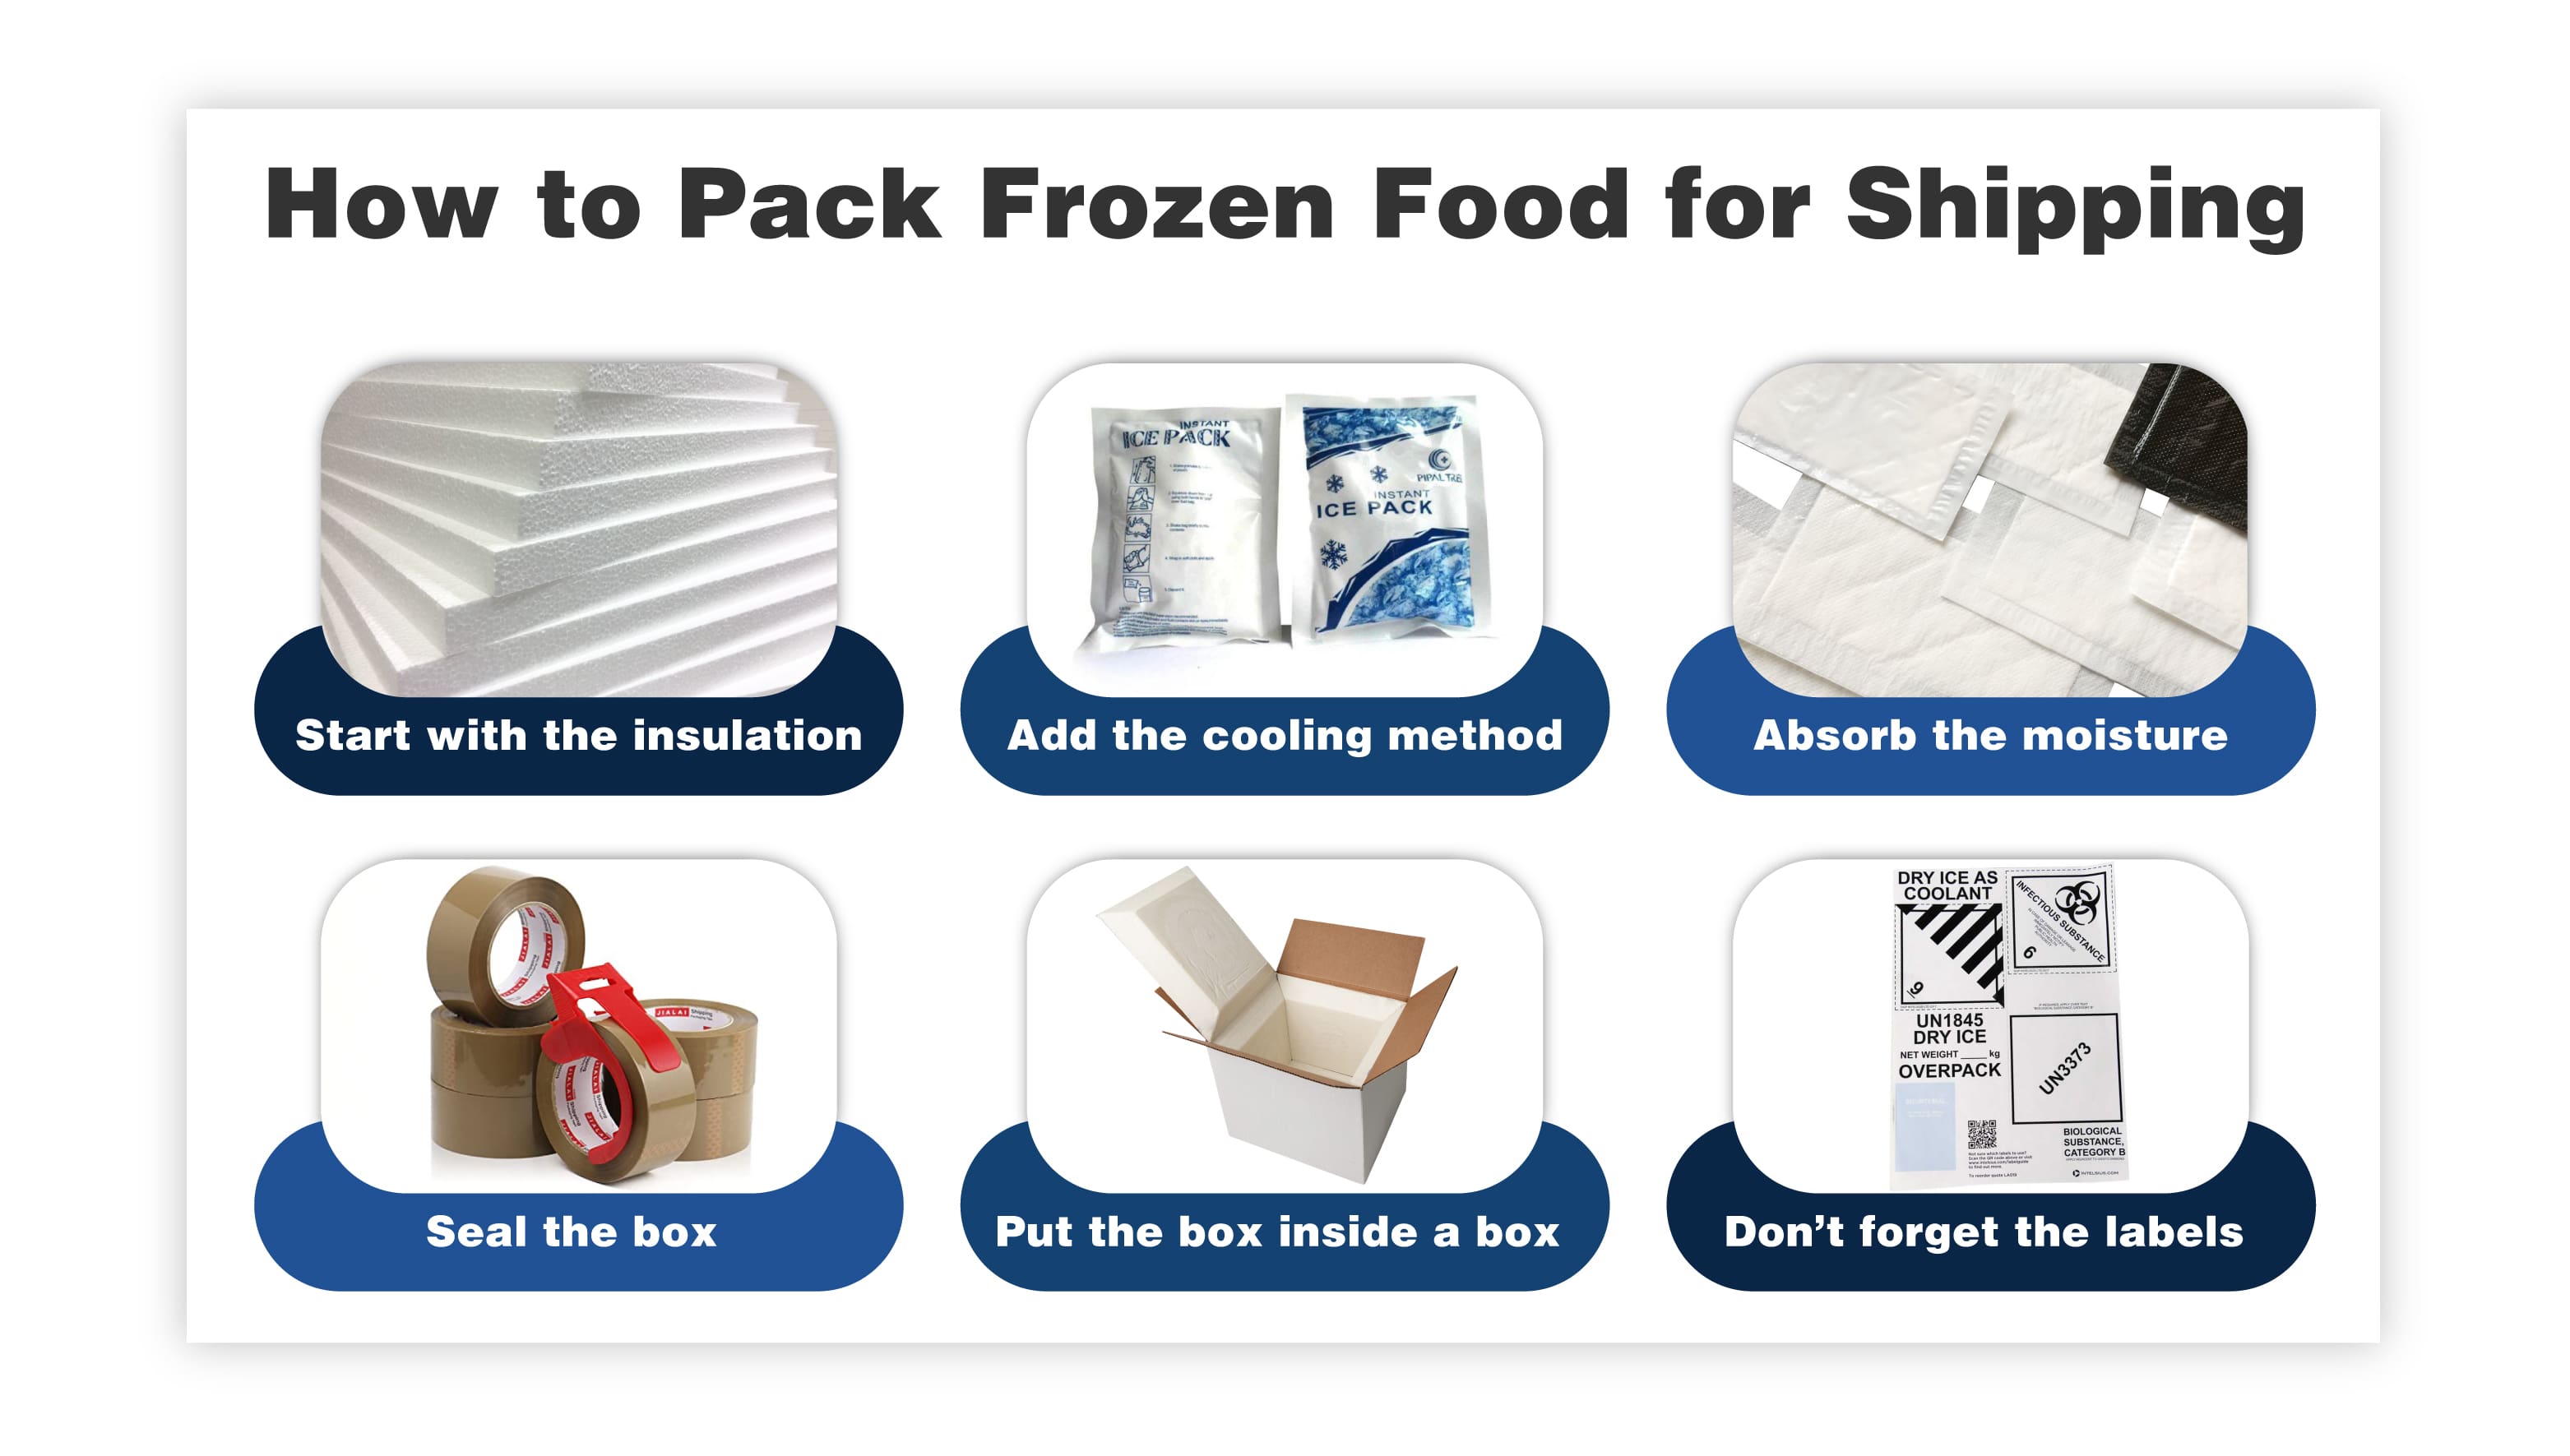 How to Pack Frozen Food for Shipping